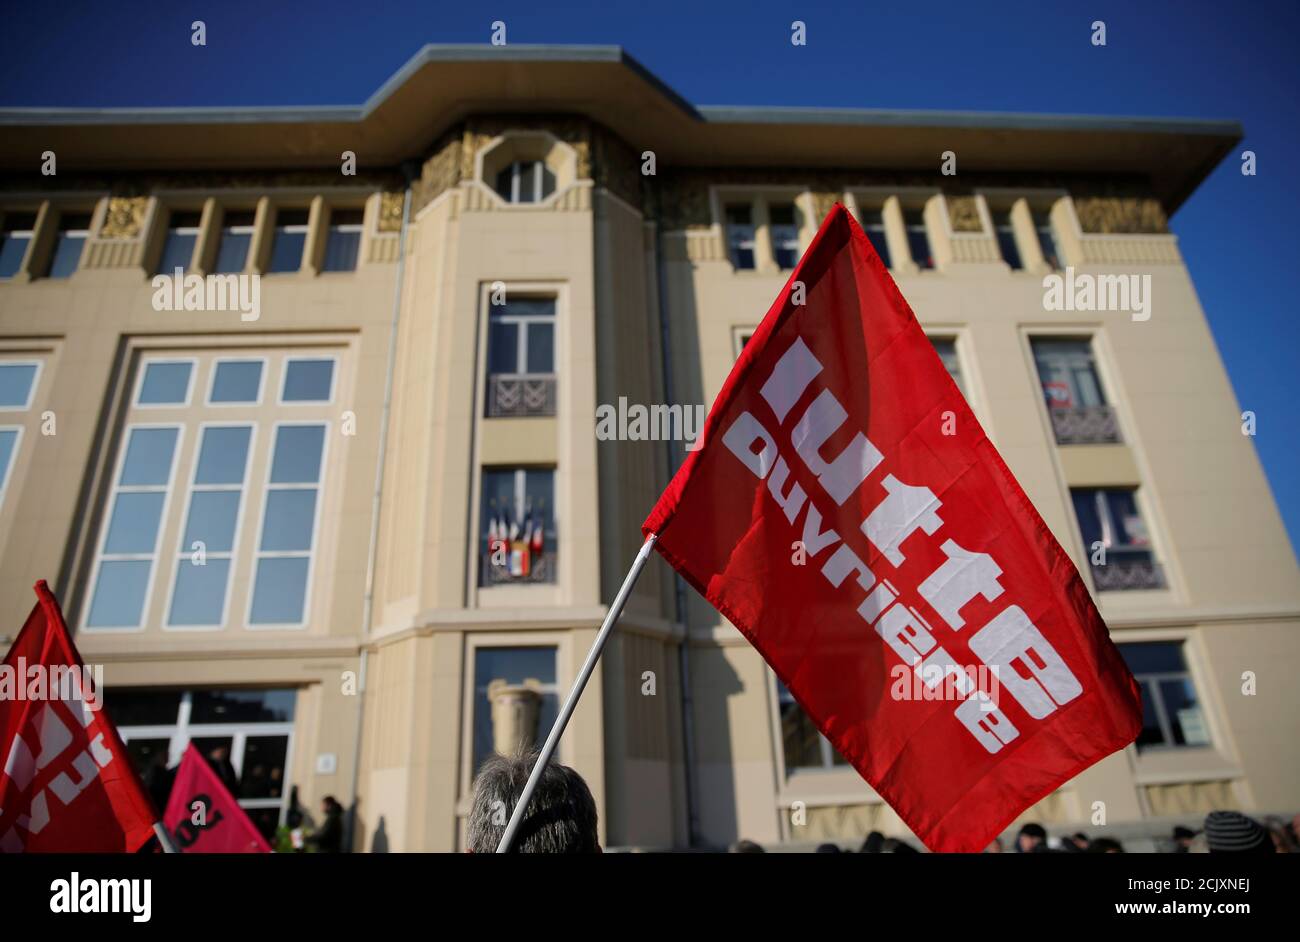 Protesters take part in a demonstration organised by French Trade Union CGT in Belfort, France, February 5, 2019. The flag of France's extreme-left Lutte Ouvriere political party (LO) reads "Working-class struggle". Picture taken February 5, 2019.  REUTERS/Vincent Kessler Stock Photo